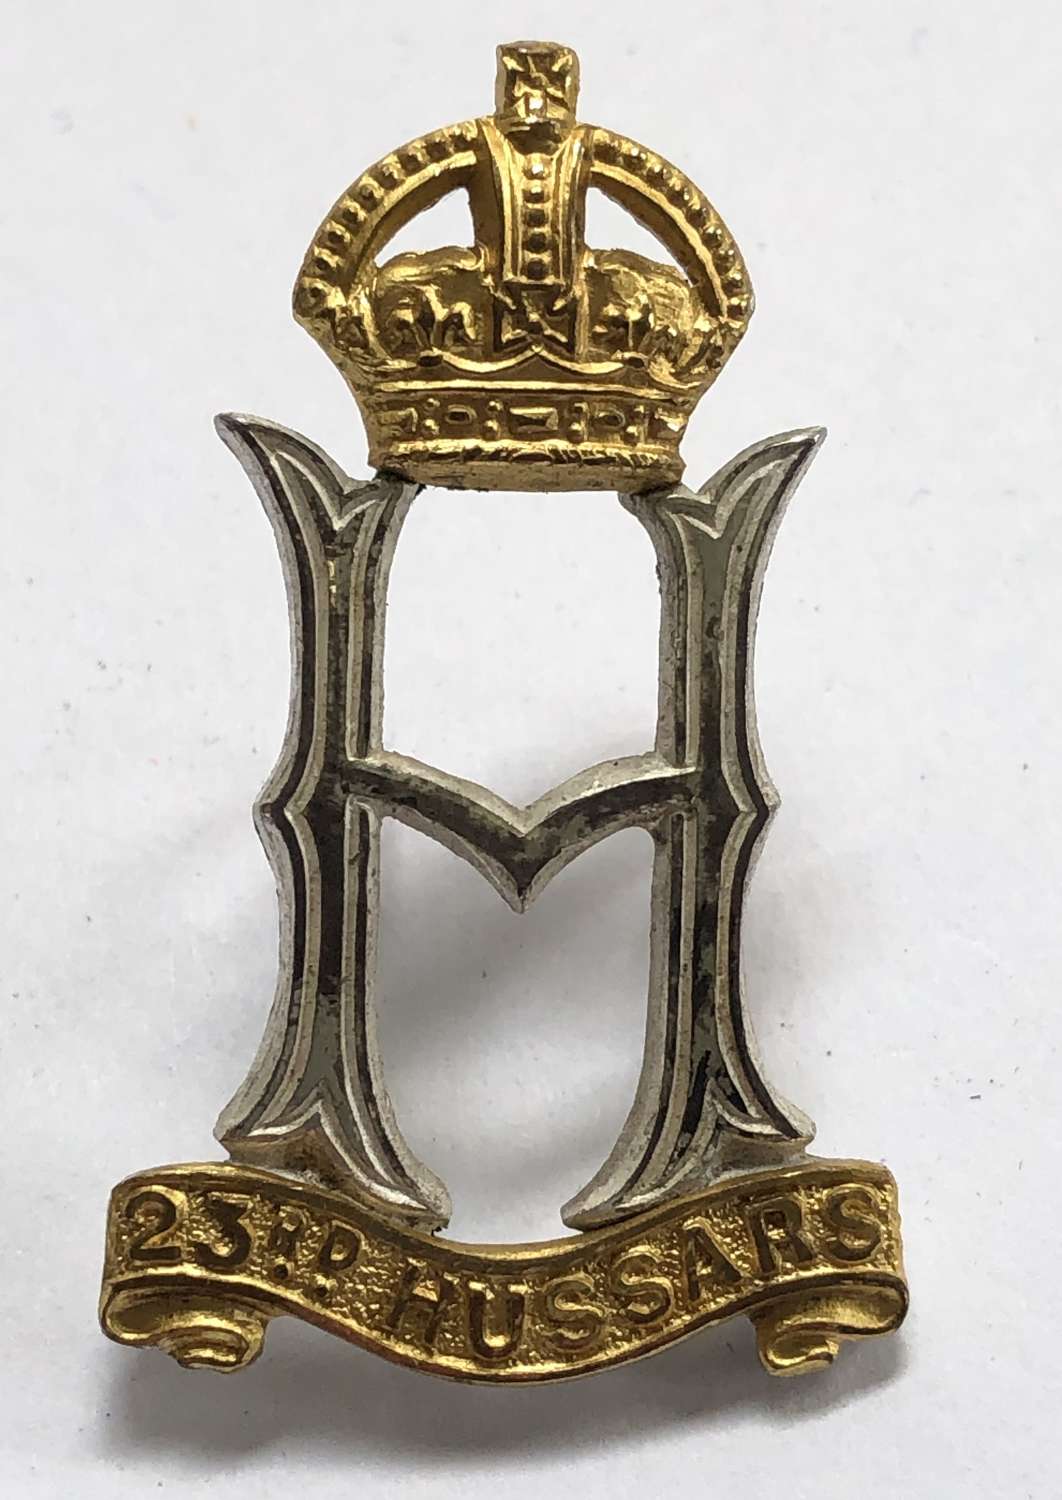 23rd Hussars Officer's silver cap badge circa 1940-46 by Gaunt